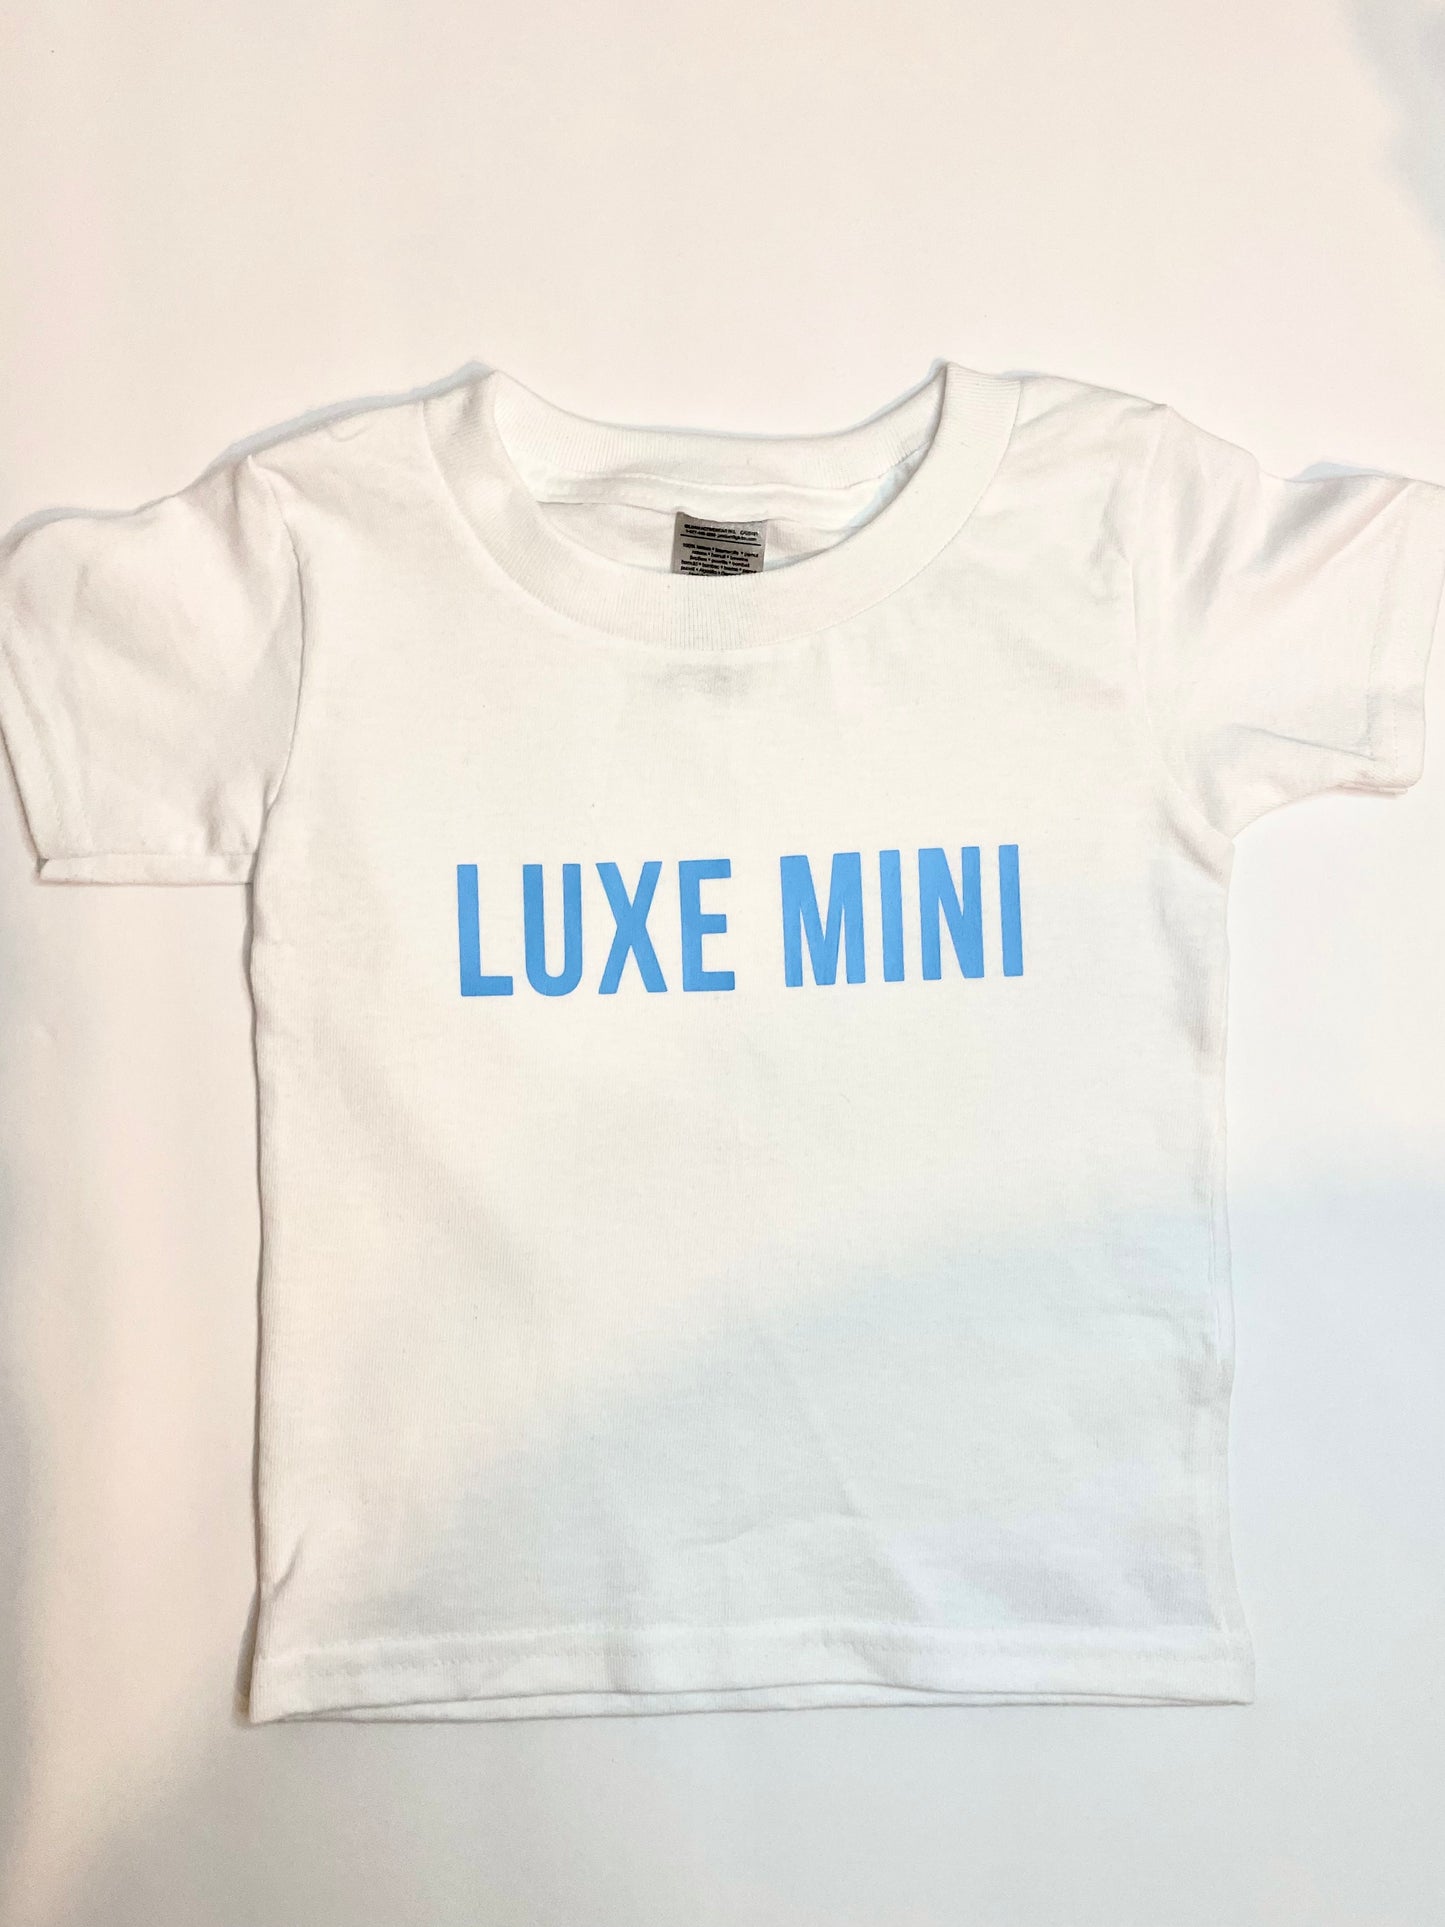 Luxe Mini youth/toddler tees